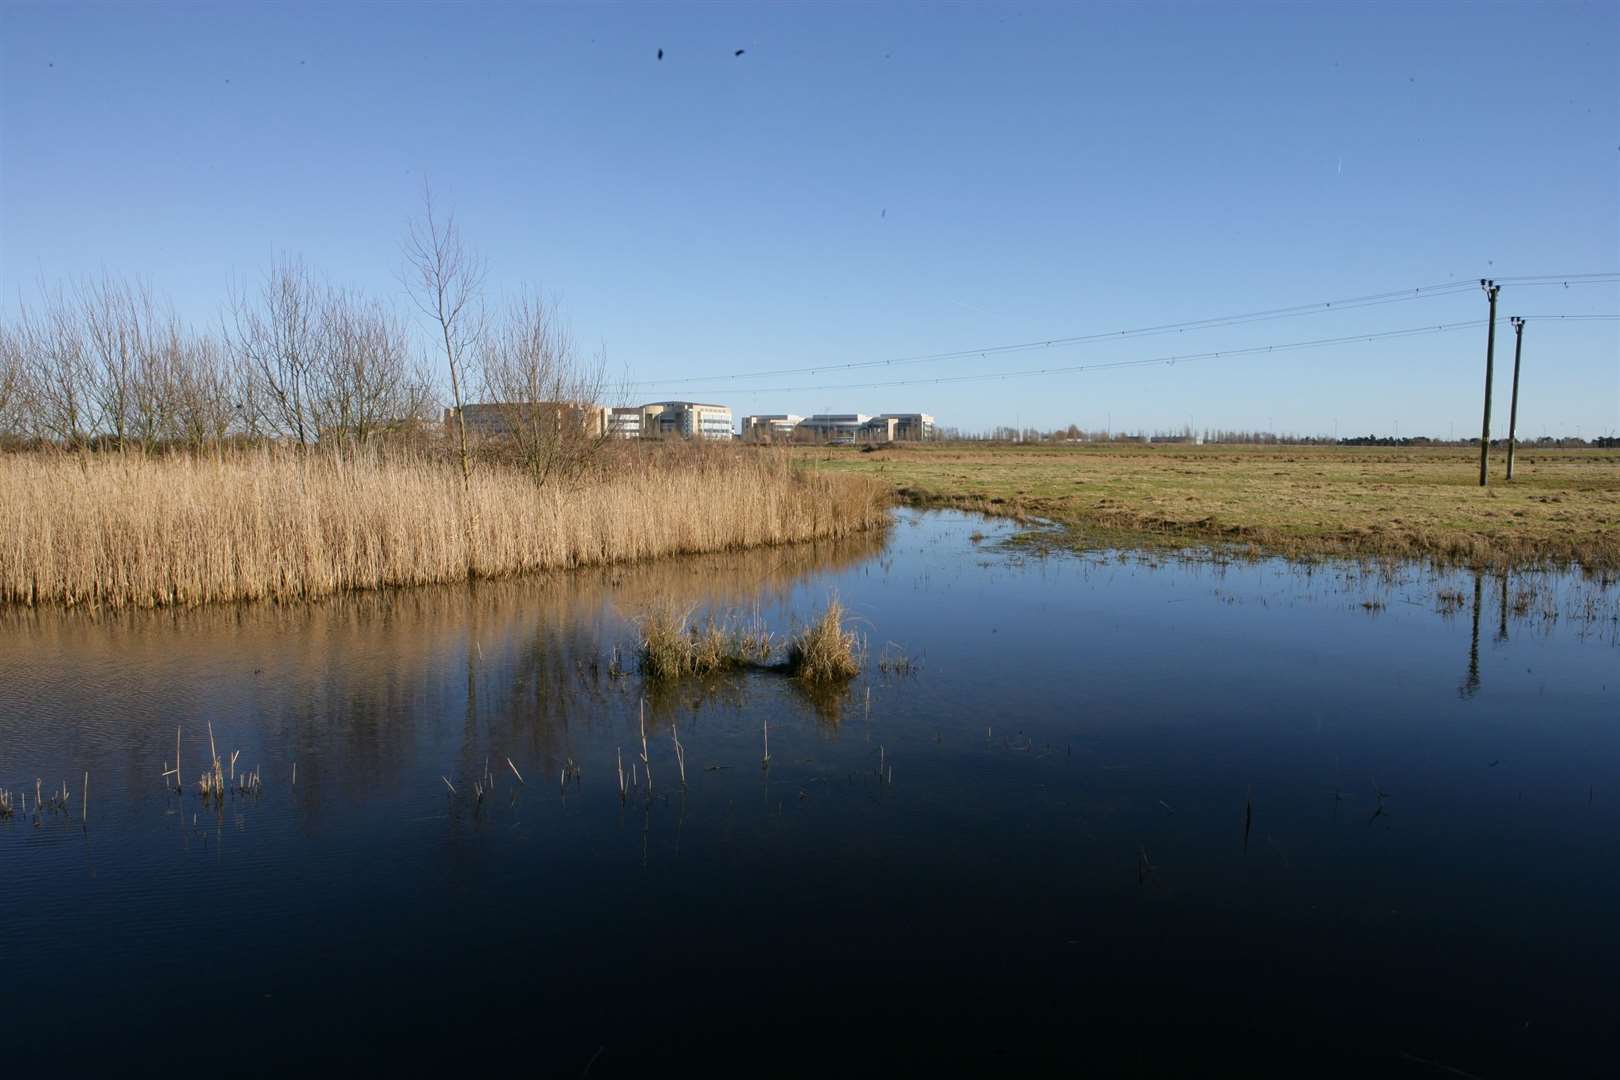 Monks Wall Nature Reserve pictured in 2011, two years before it closed. Picture: Martin Apps